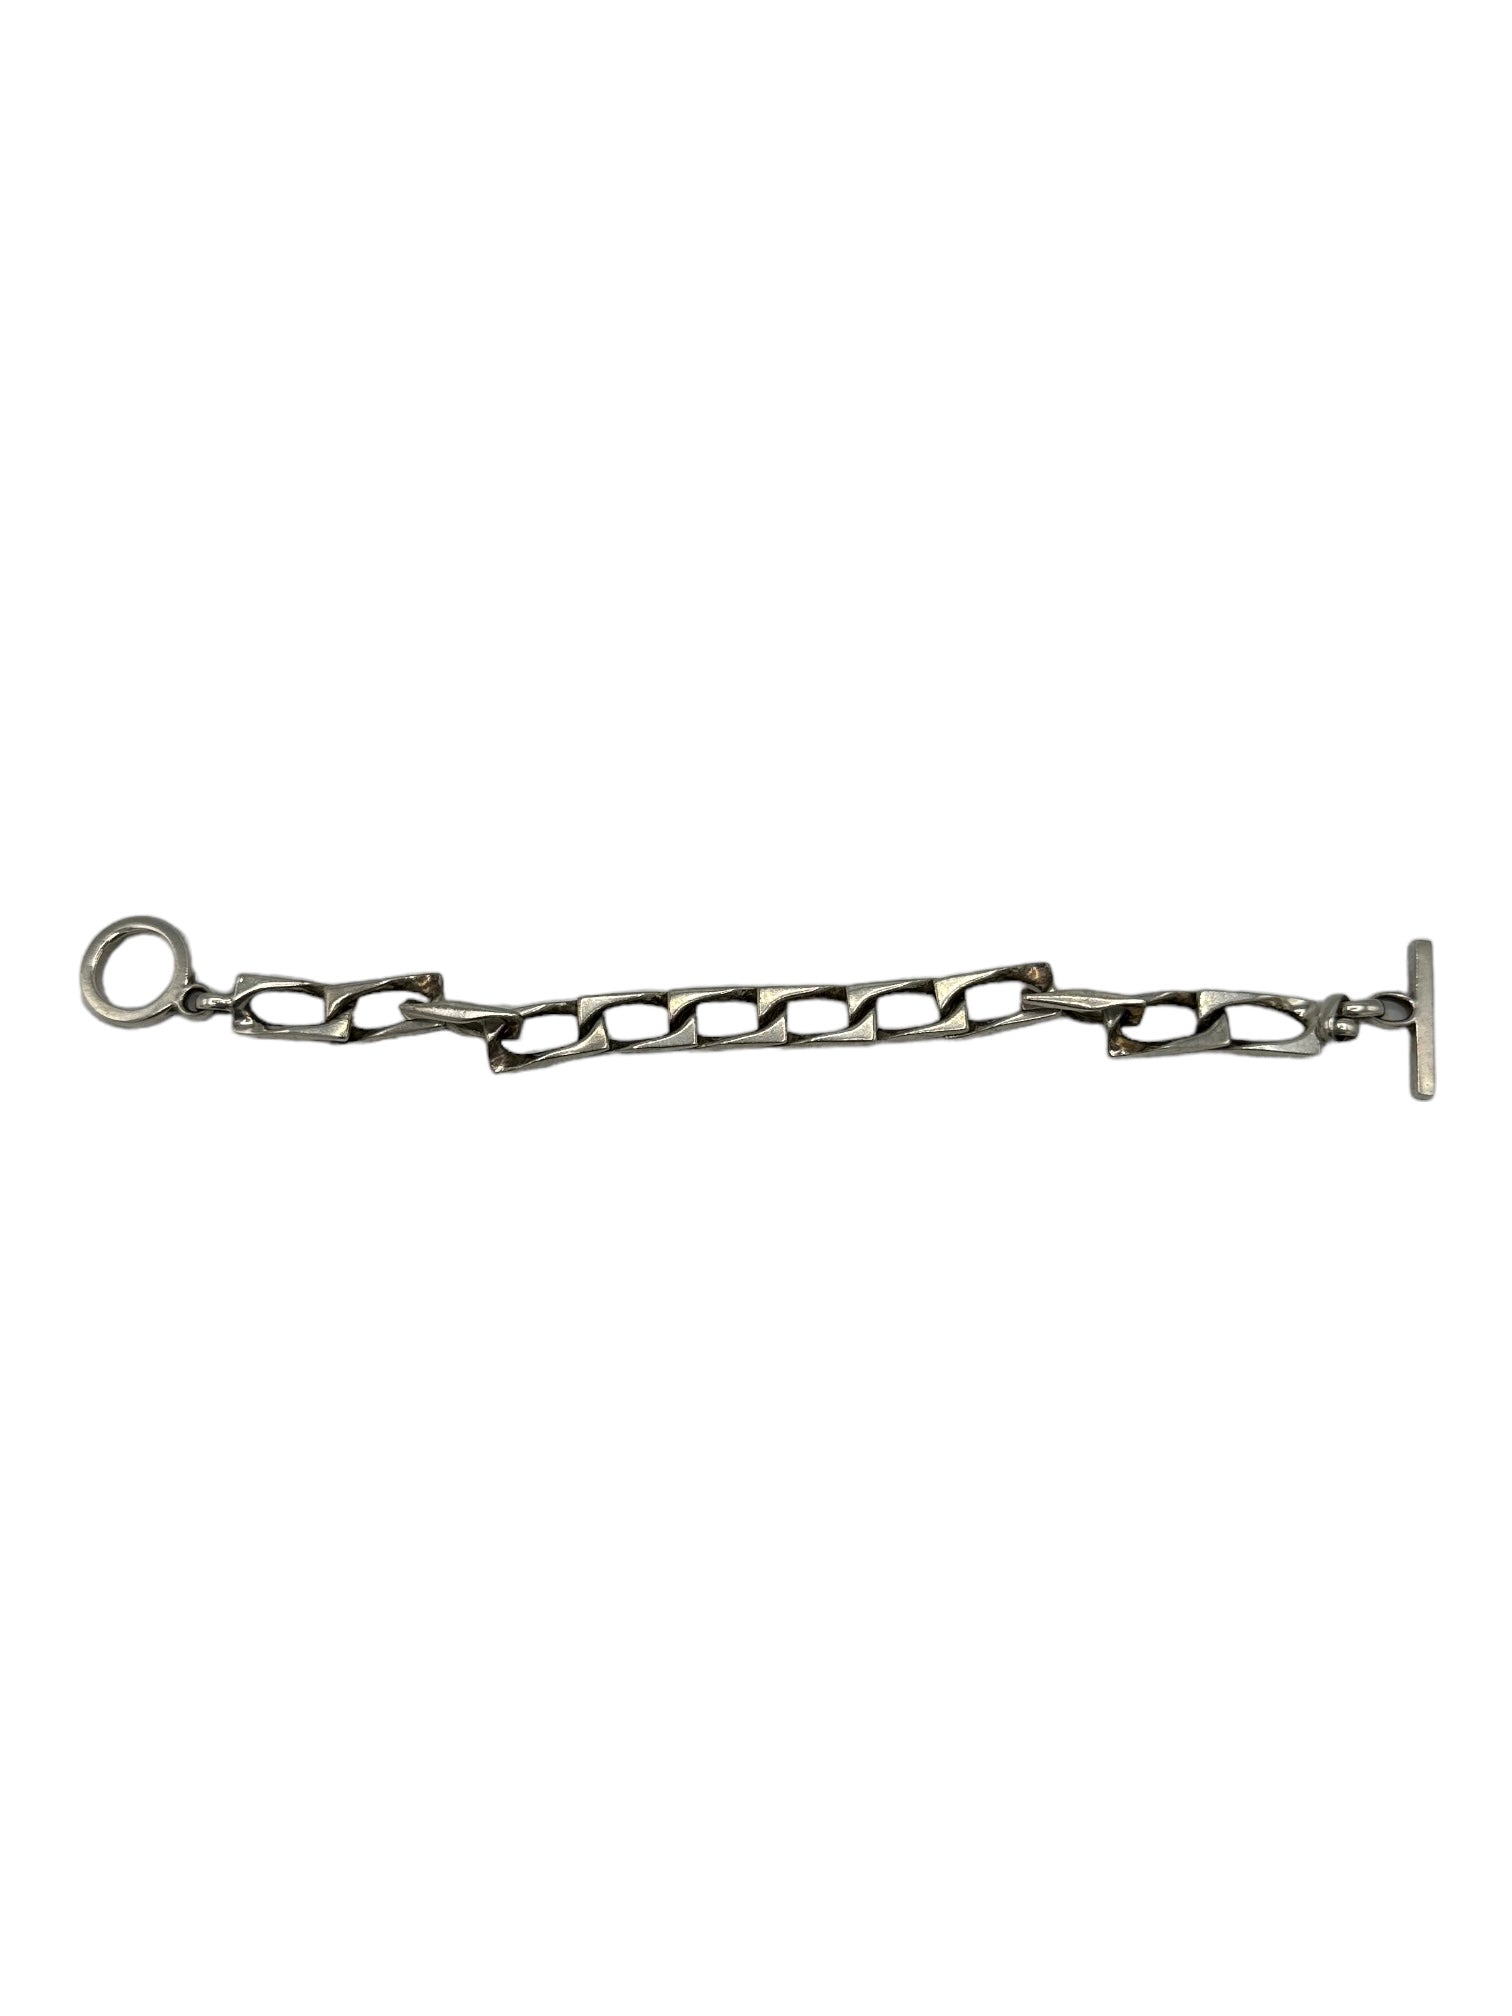 Gucci Silver Chunky Linked Bracelet - Genuine Design luxury consignment Calgary, Alberta, Canada New and pre-owned clothing, shoes, accessories.